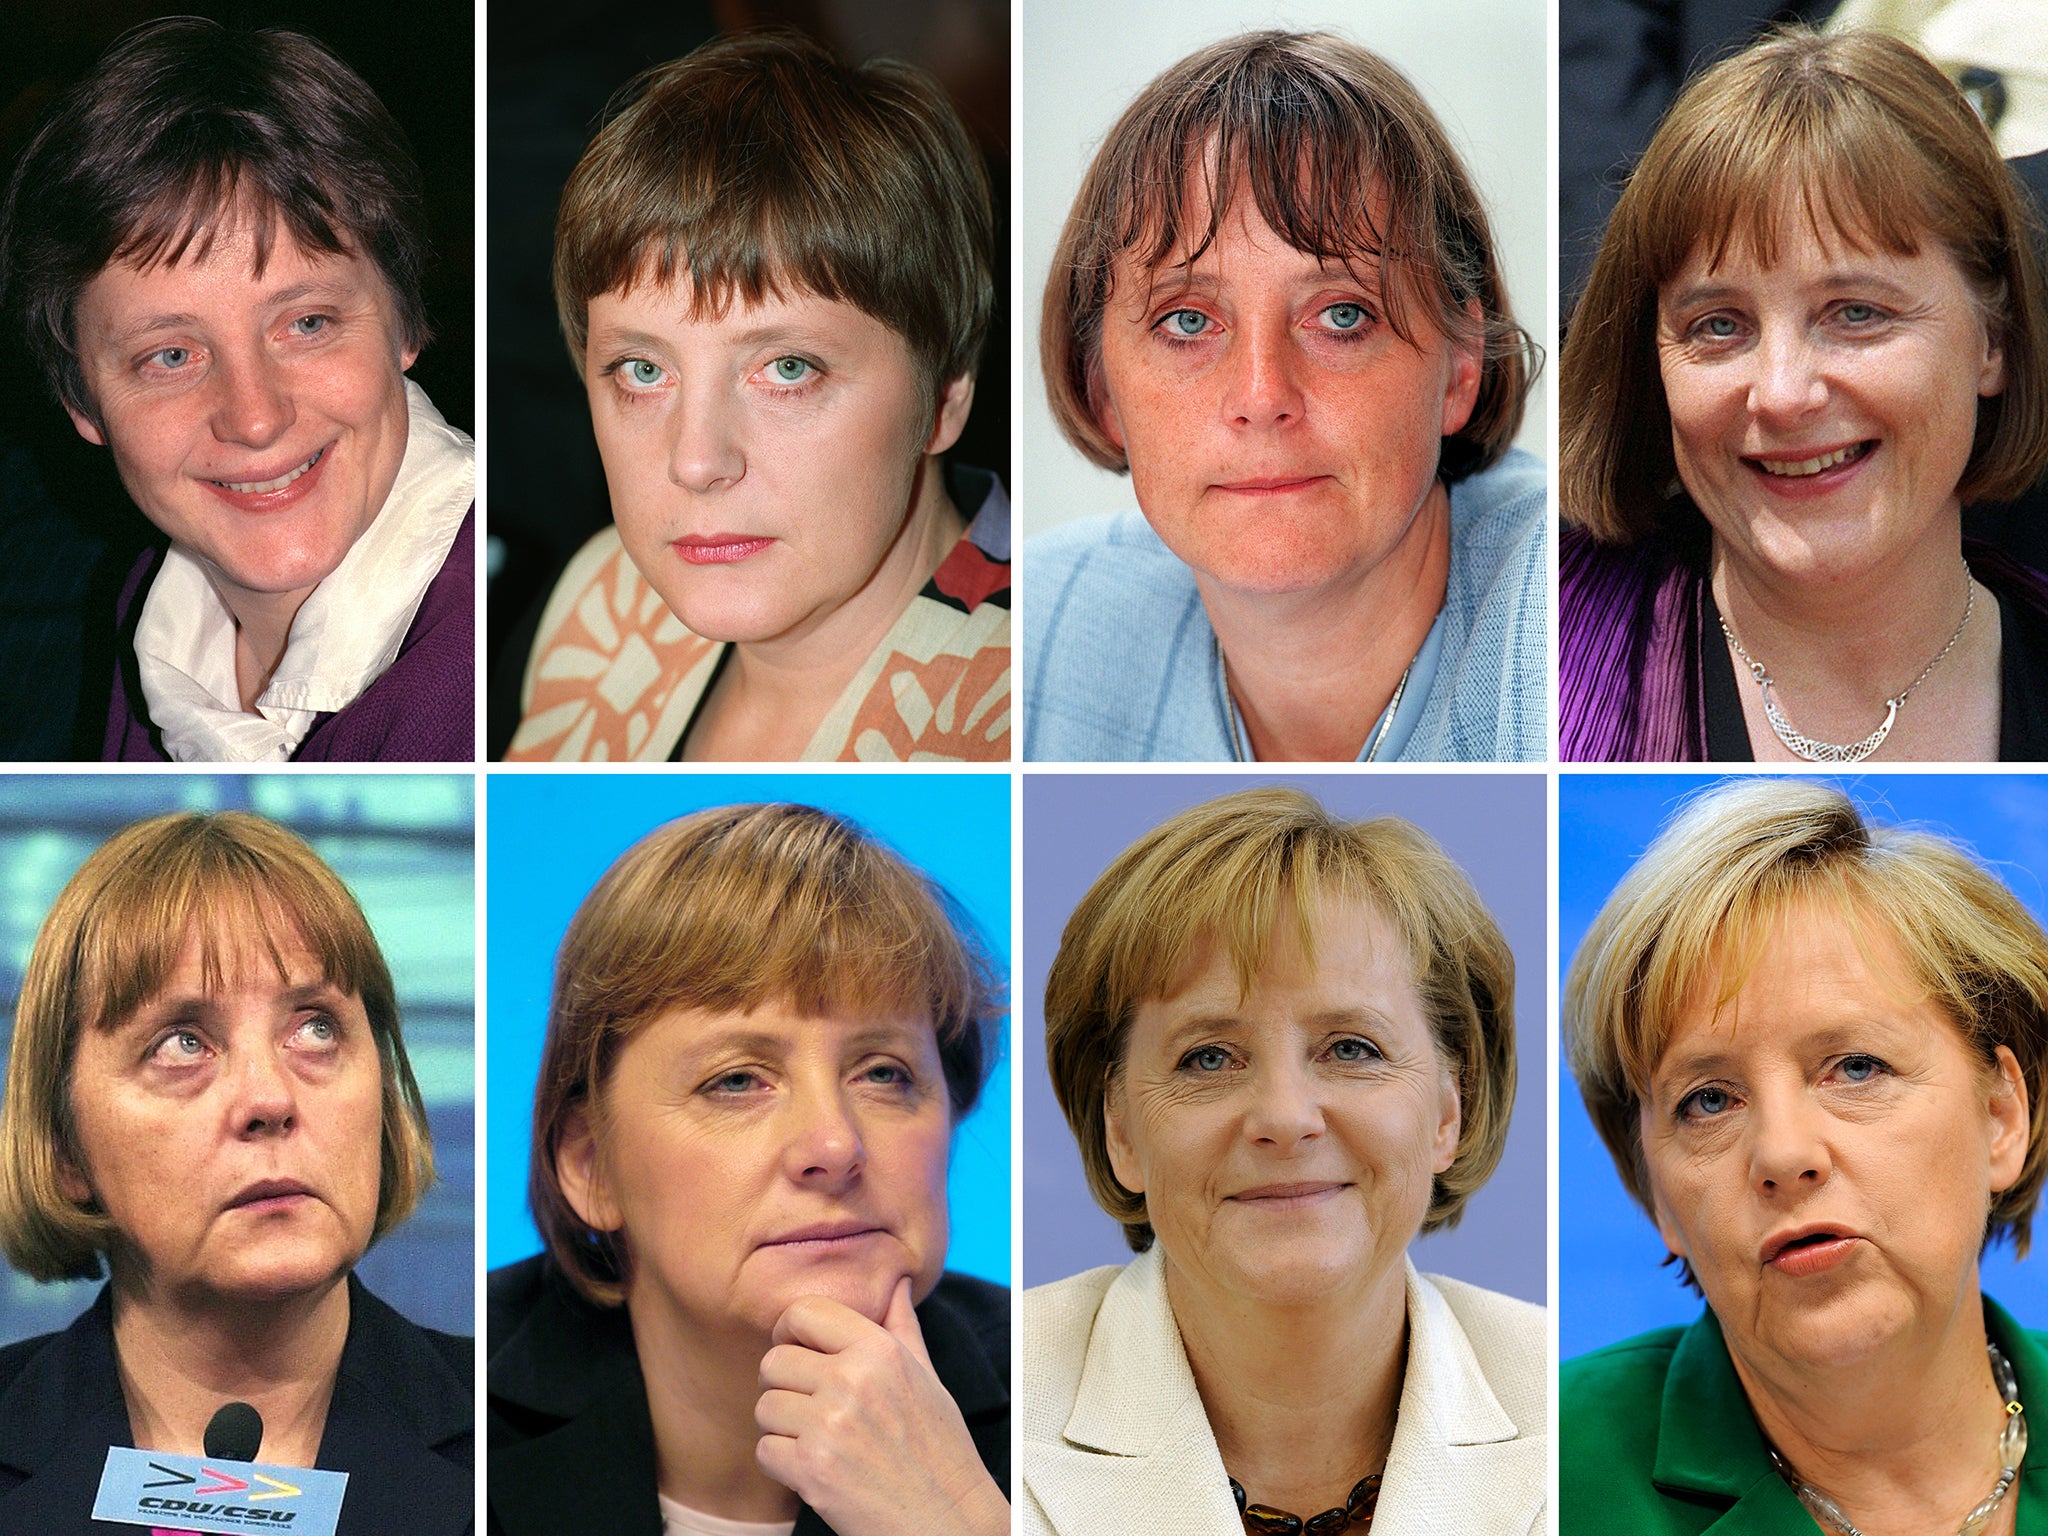 Mother of the nation: the many faces of Angela Merkel